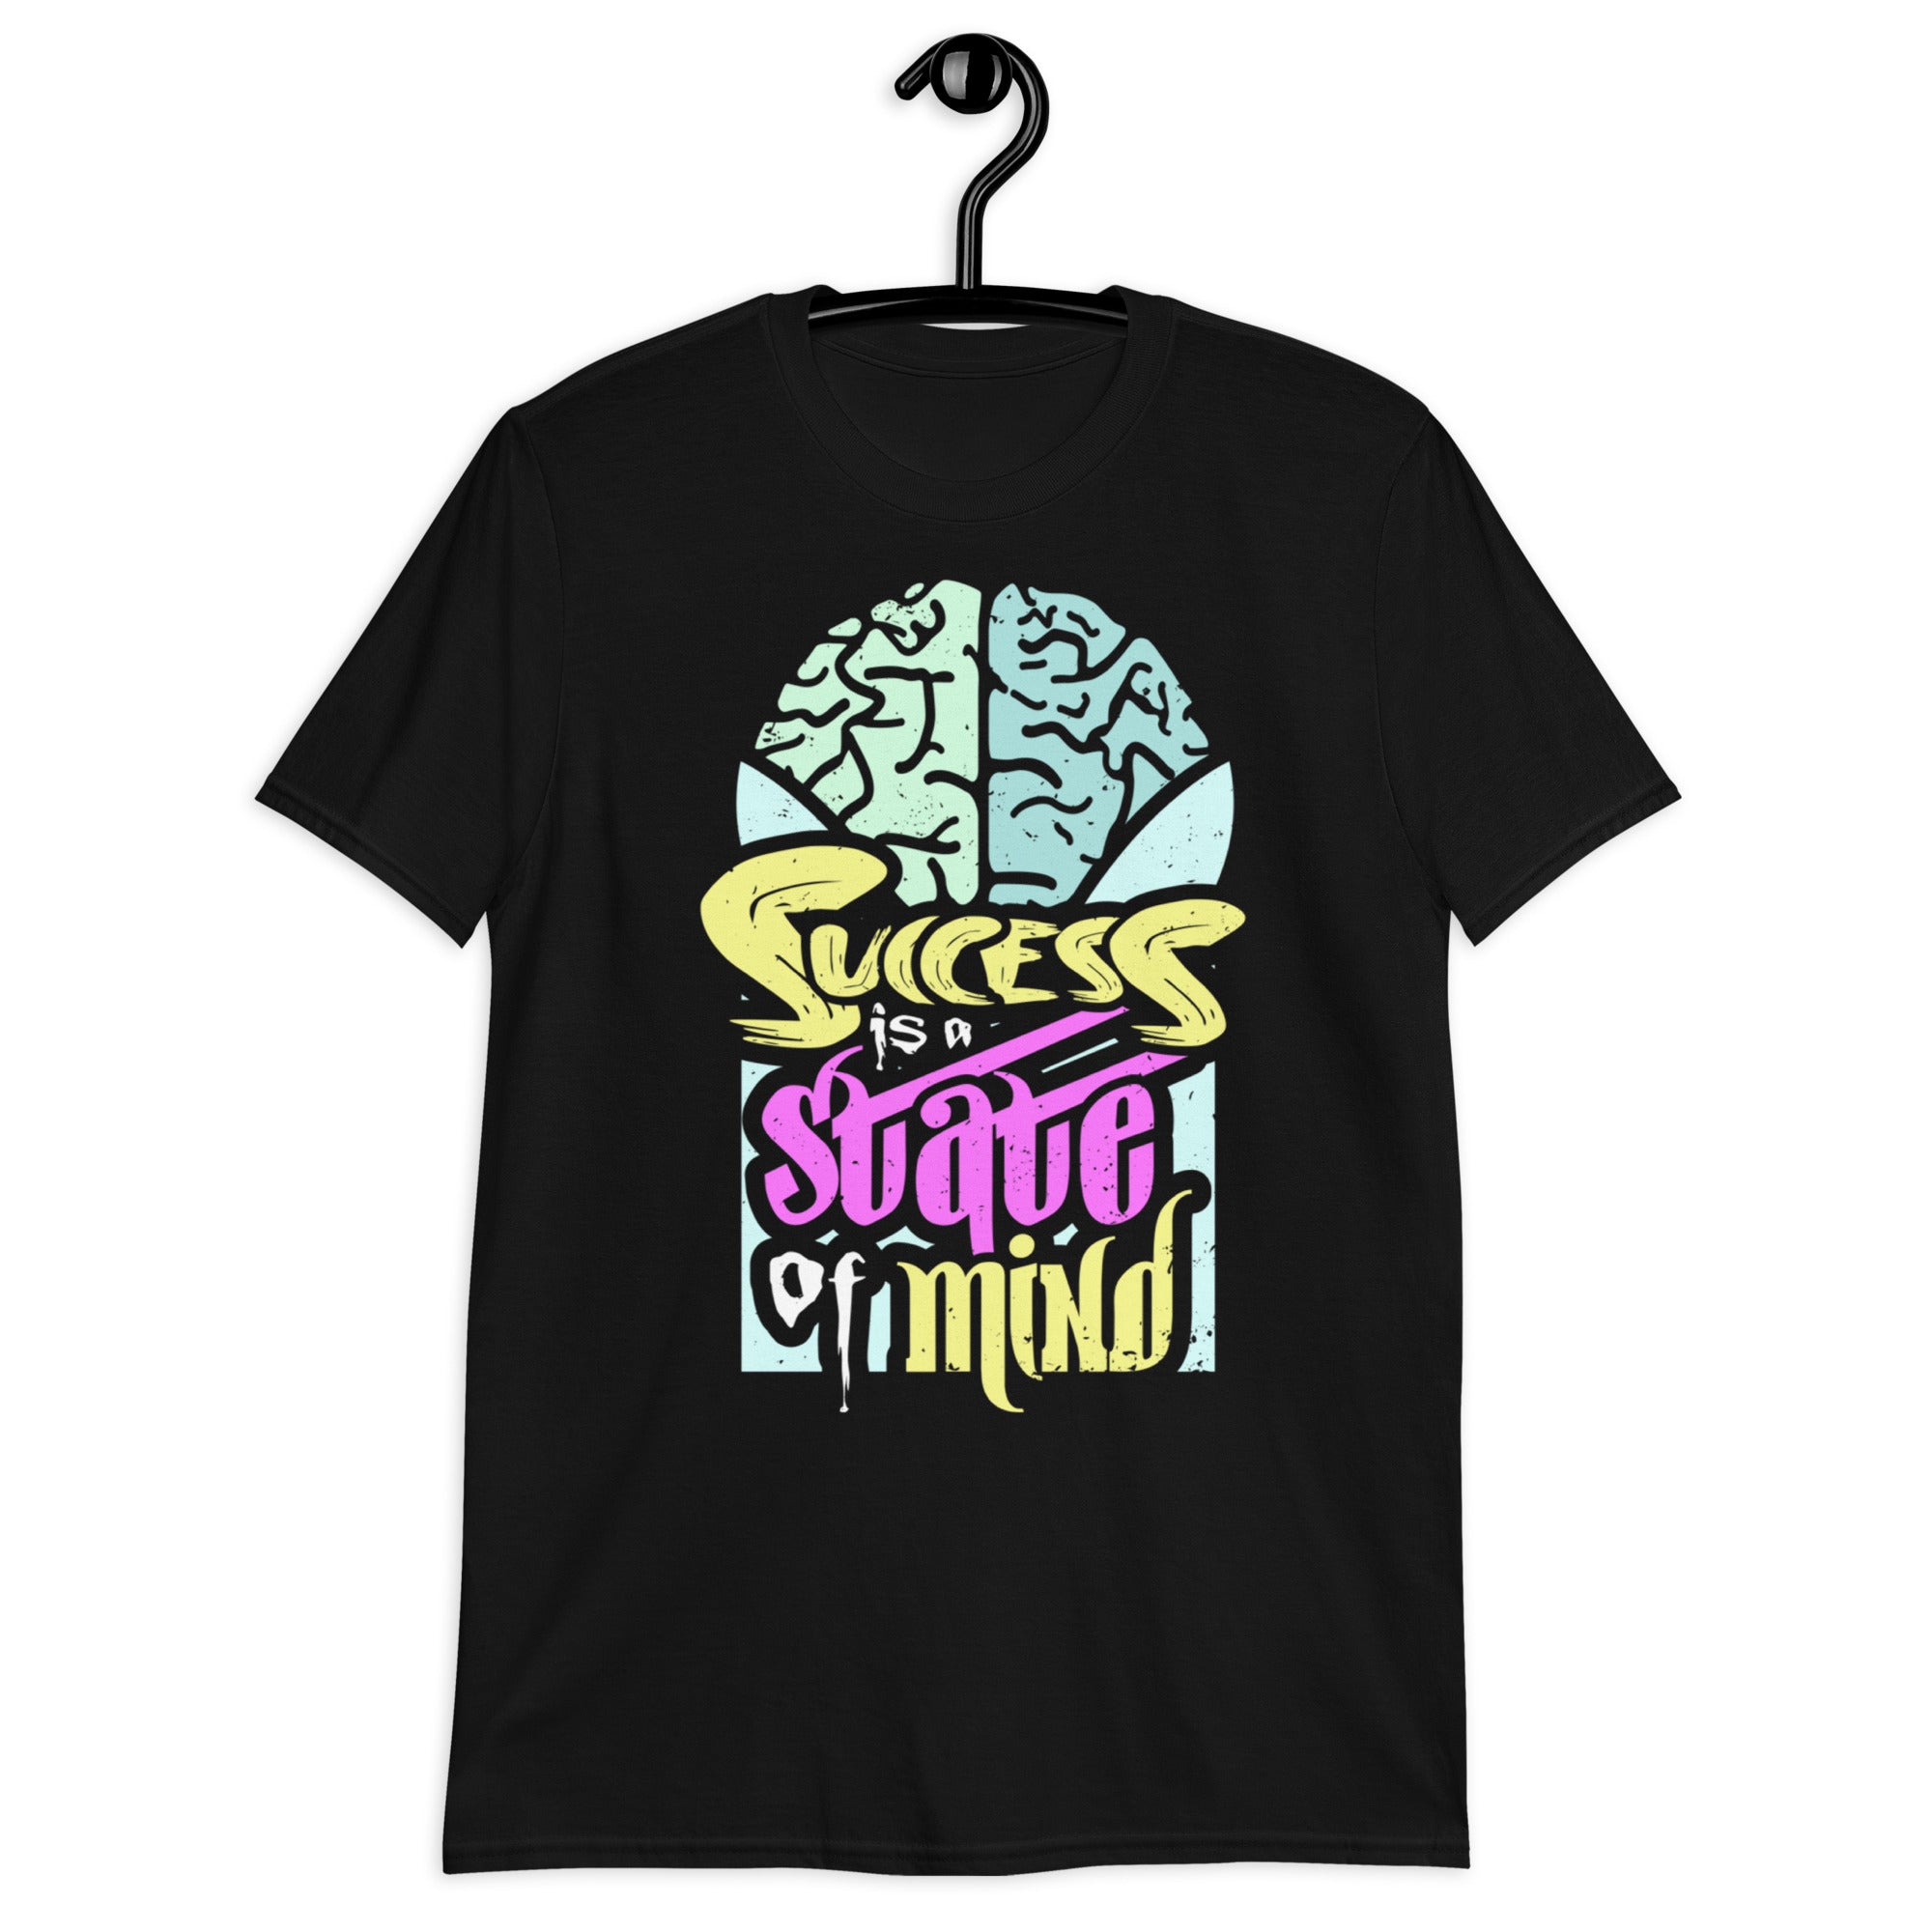 Success Is A State of Mind - Short-Sleeve Unisex T-Shirt